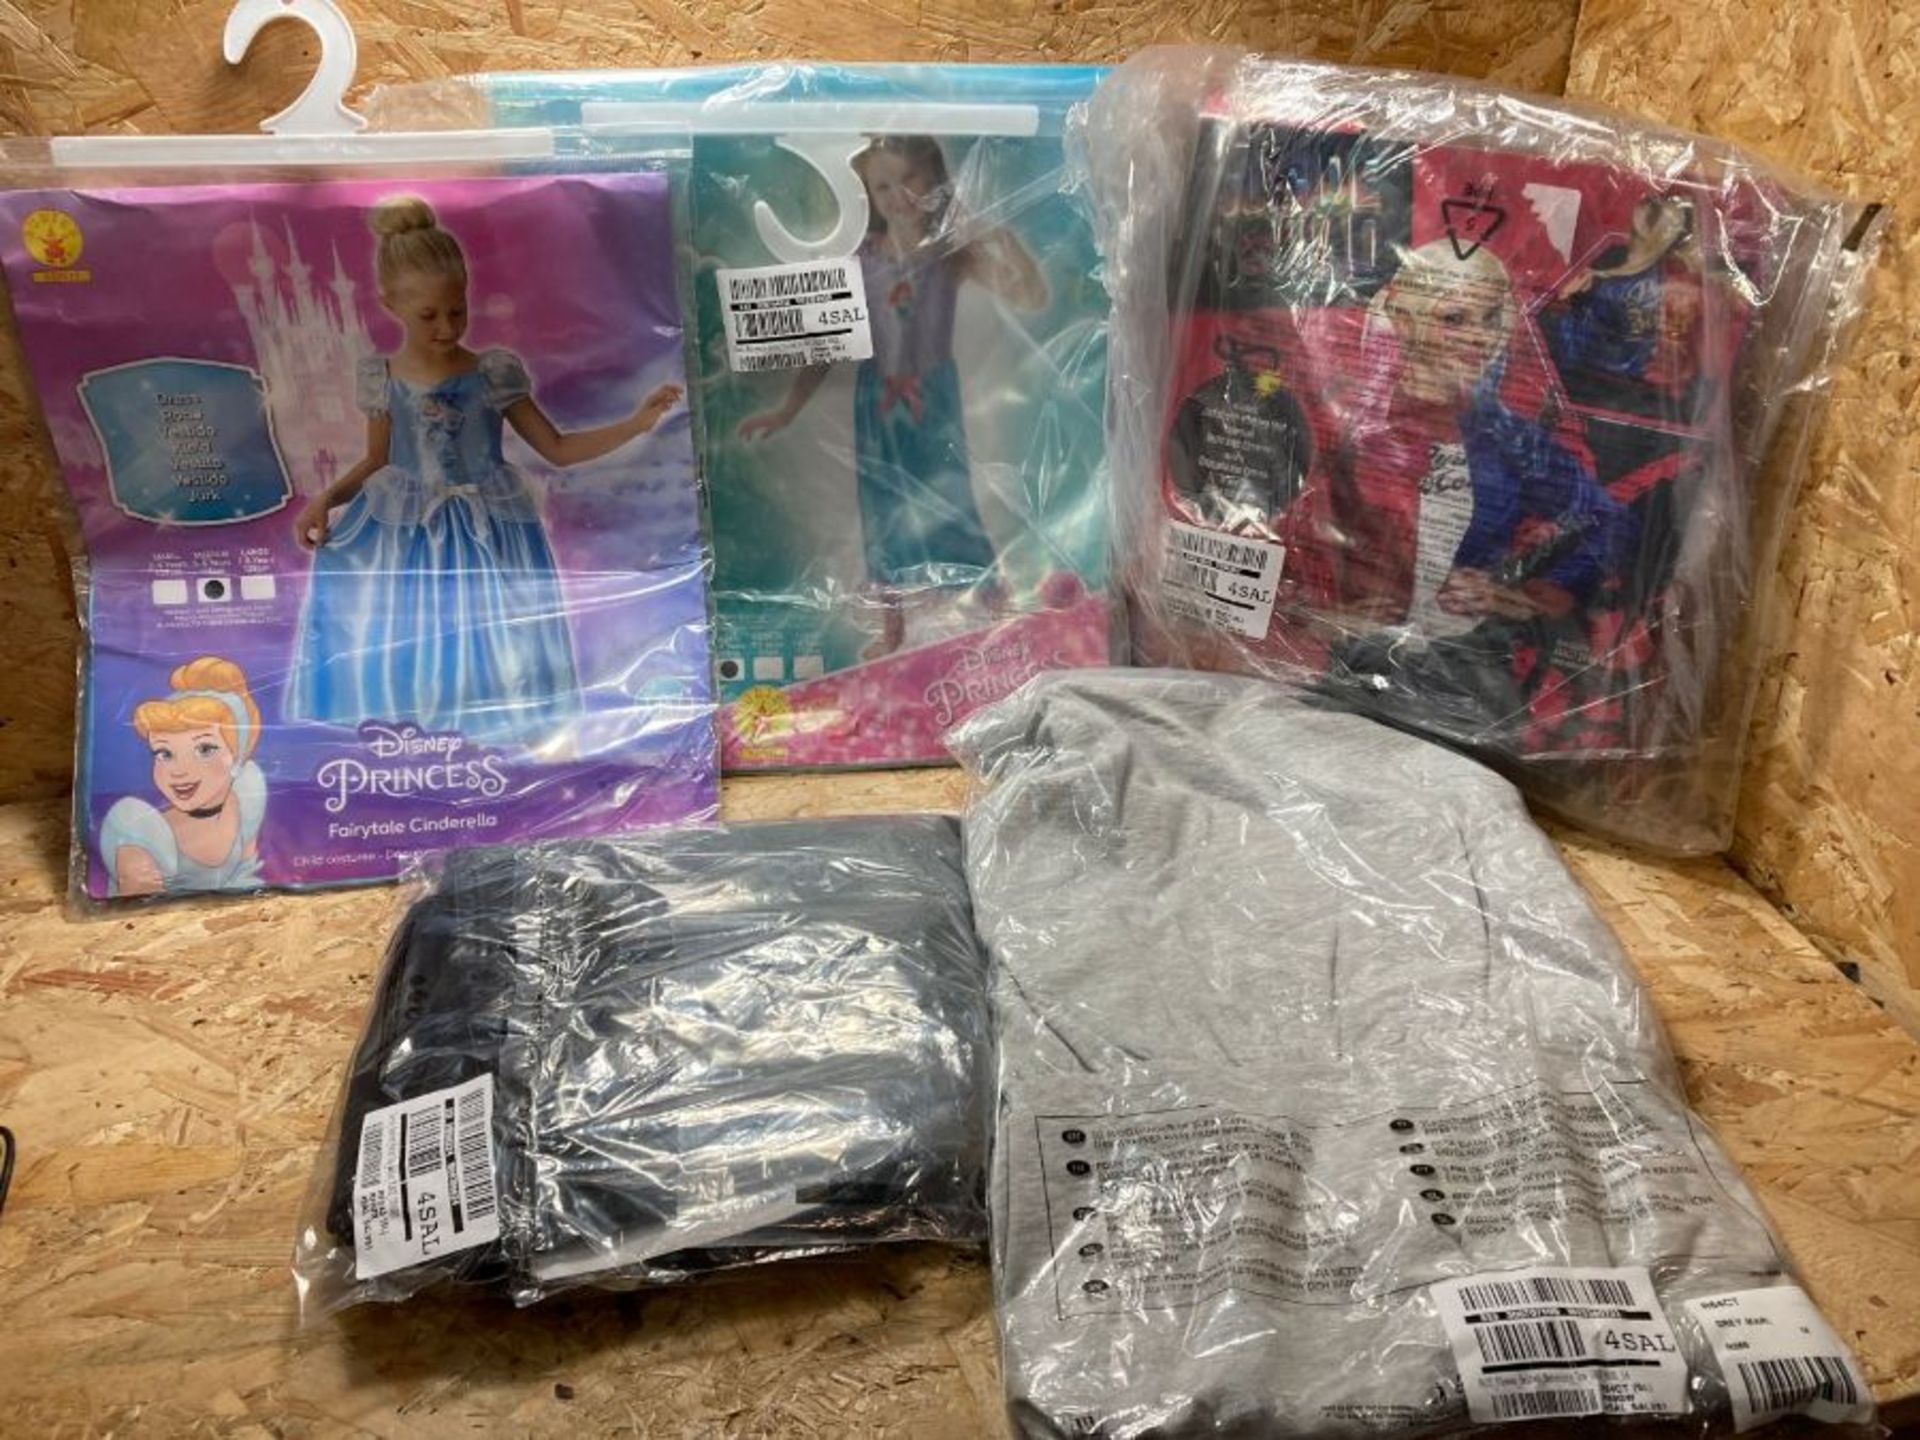 5 X ASSORTED ITEMS OF CLOTHING / INCLUDES COSTUMES / CUSTOMER RETURNS. CONDITIONS, SIZES AND